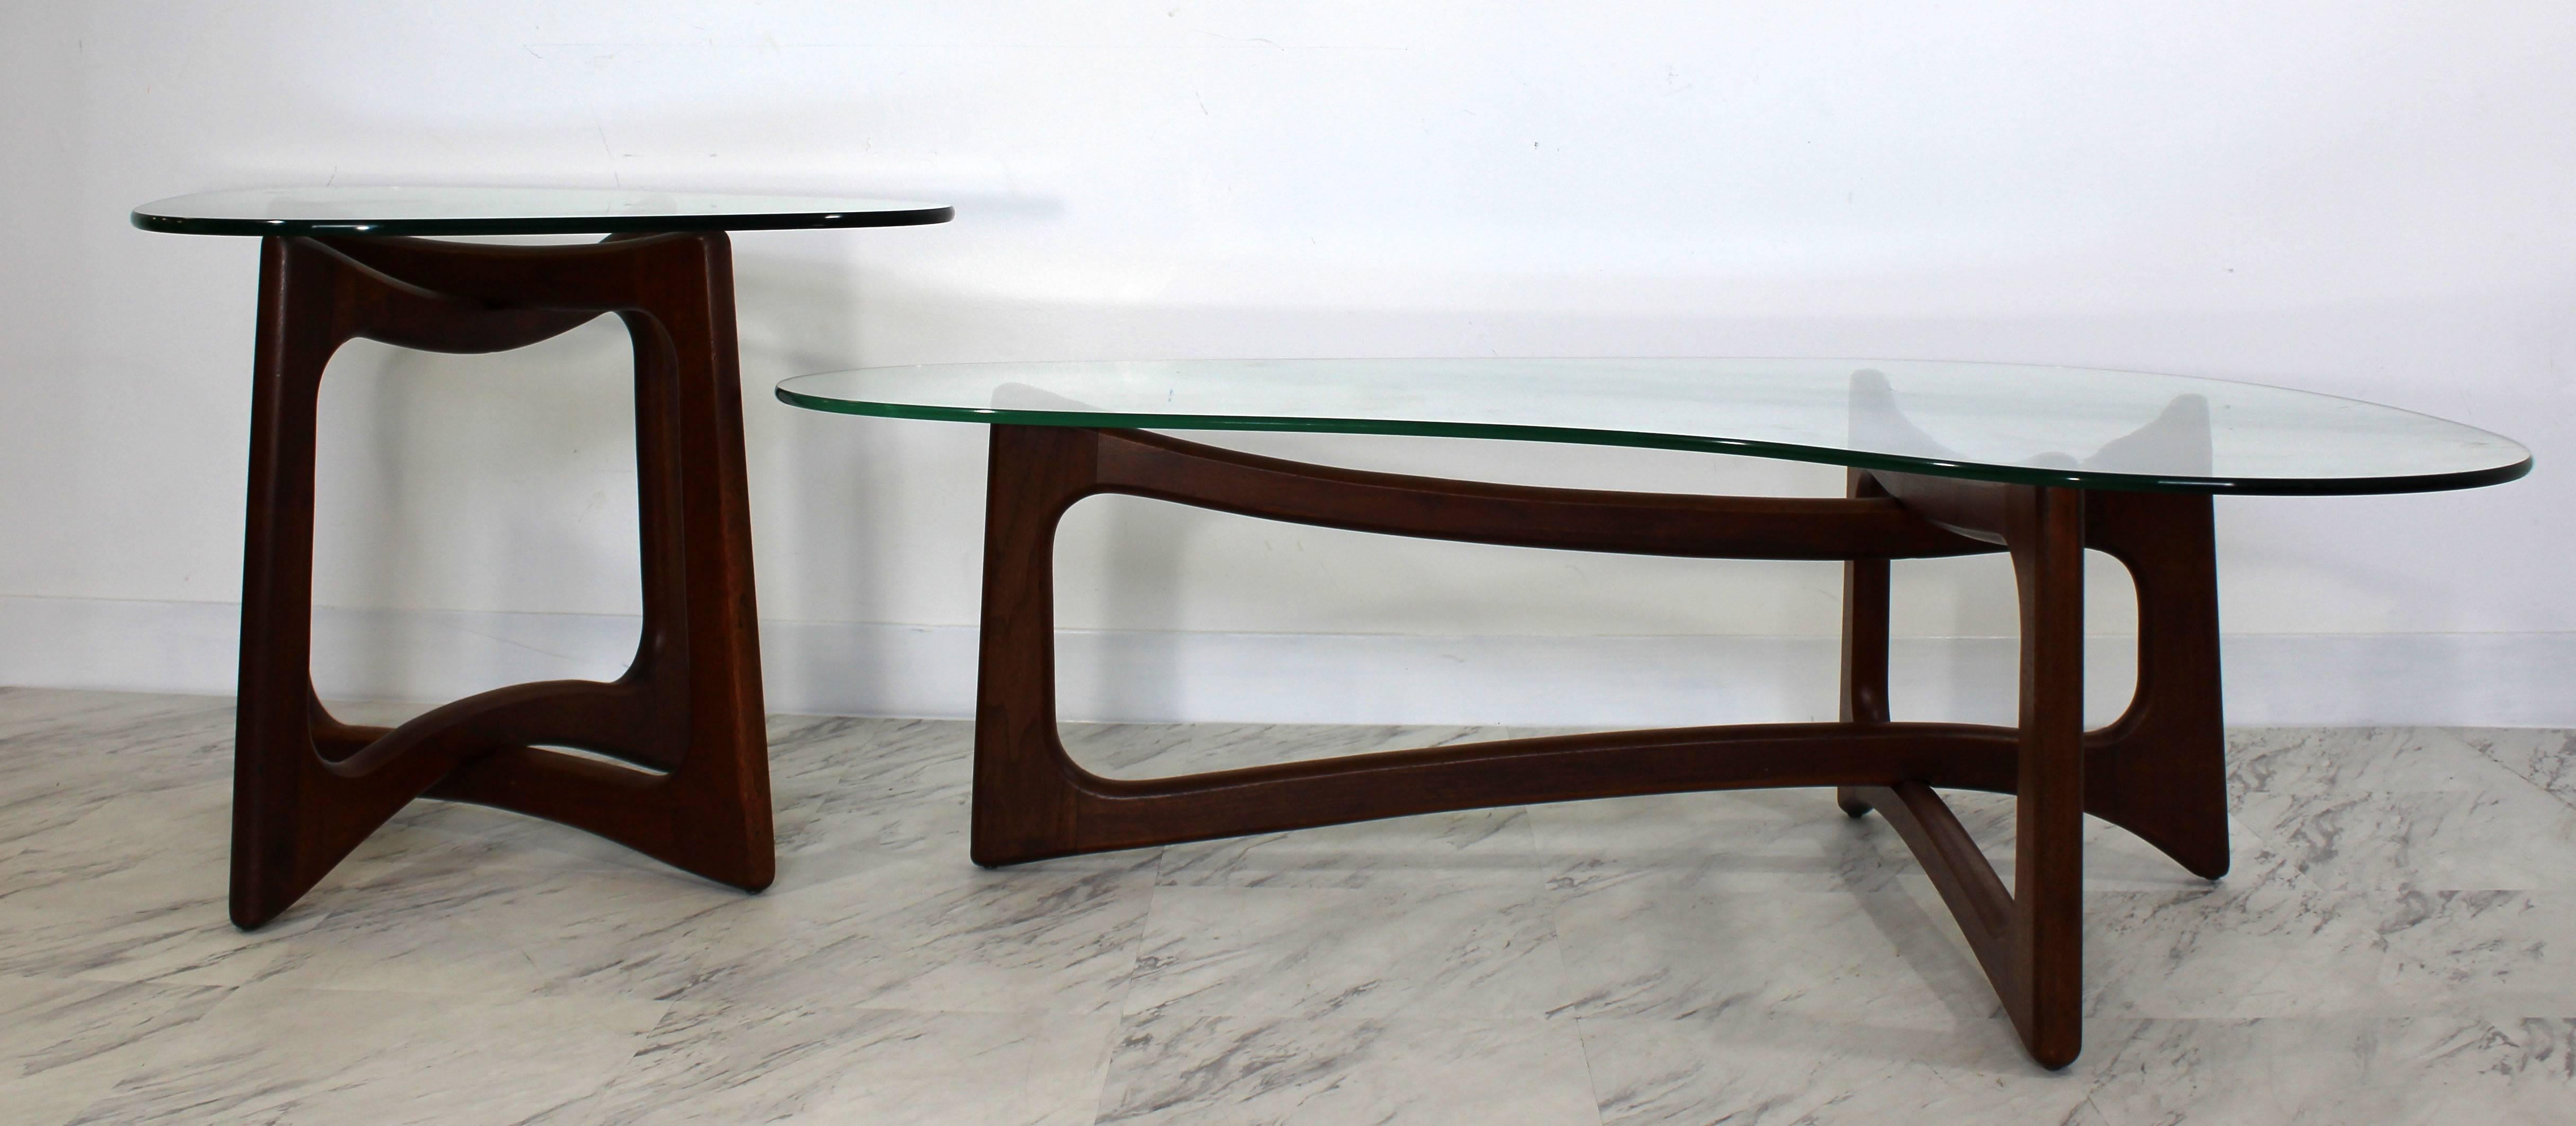 American Mid-Century Modern Pair of Pearsall Walnut Boomerang Kidney Coffee and End Table